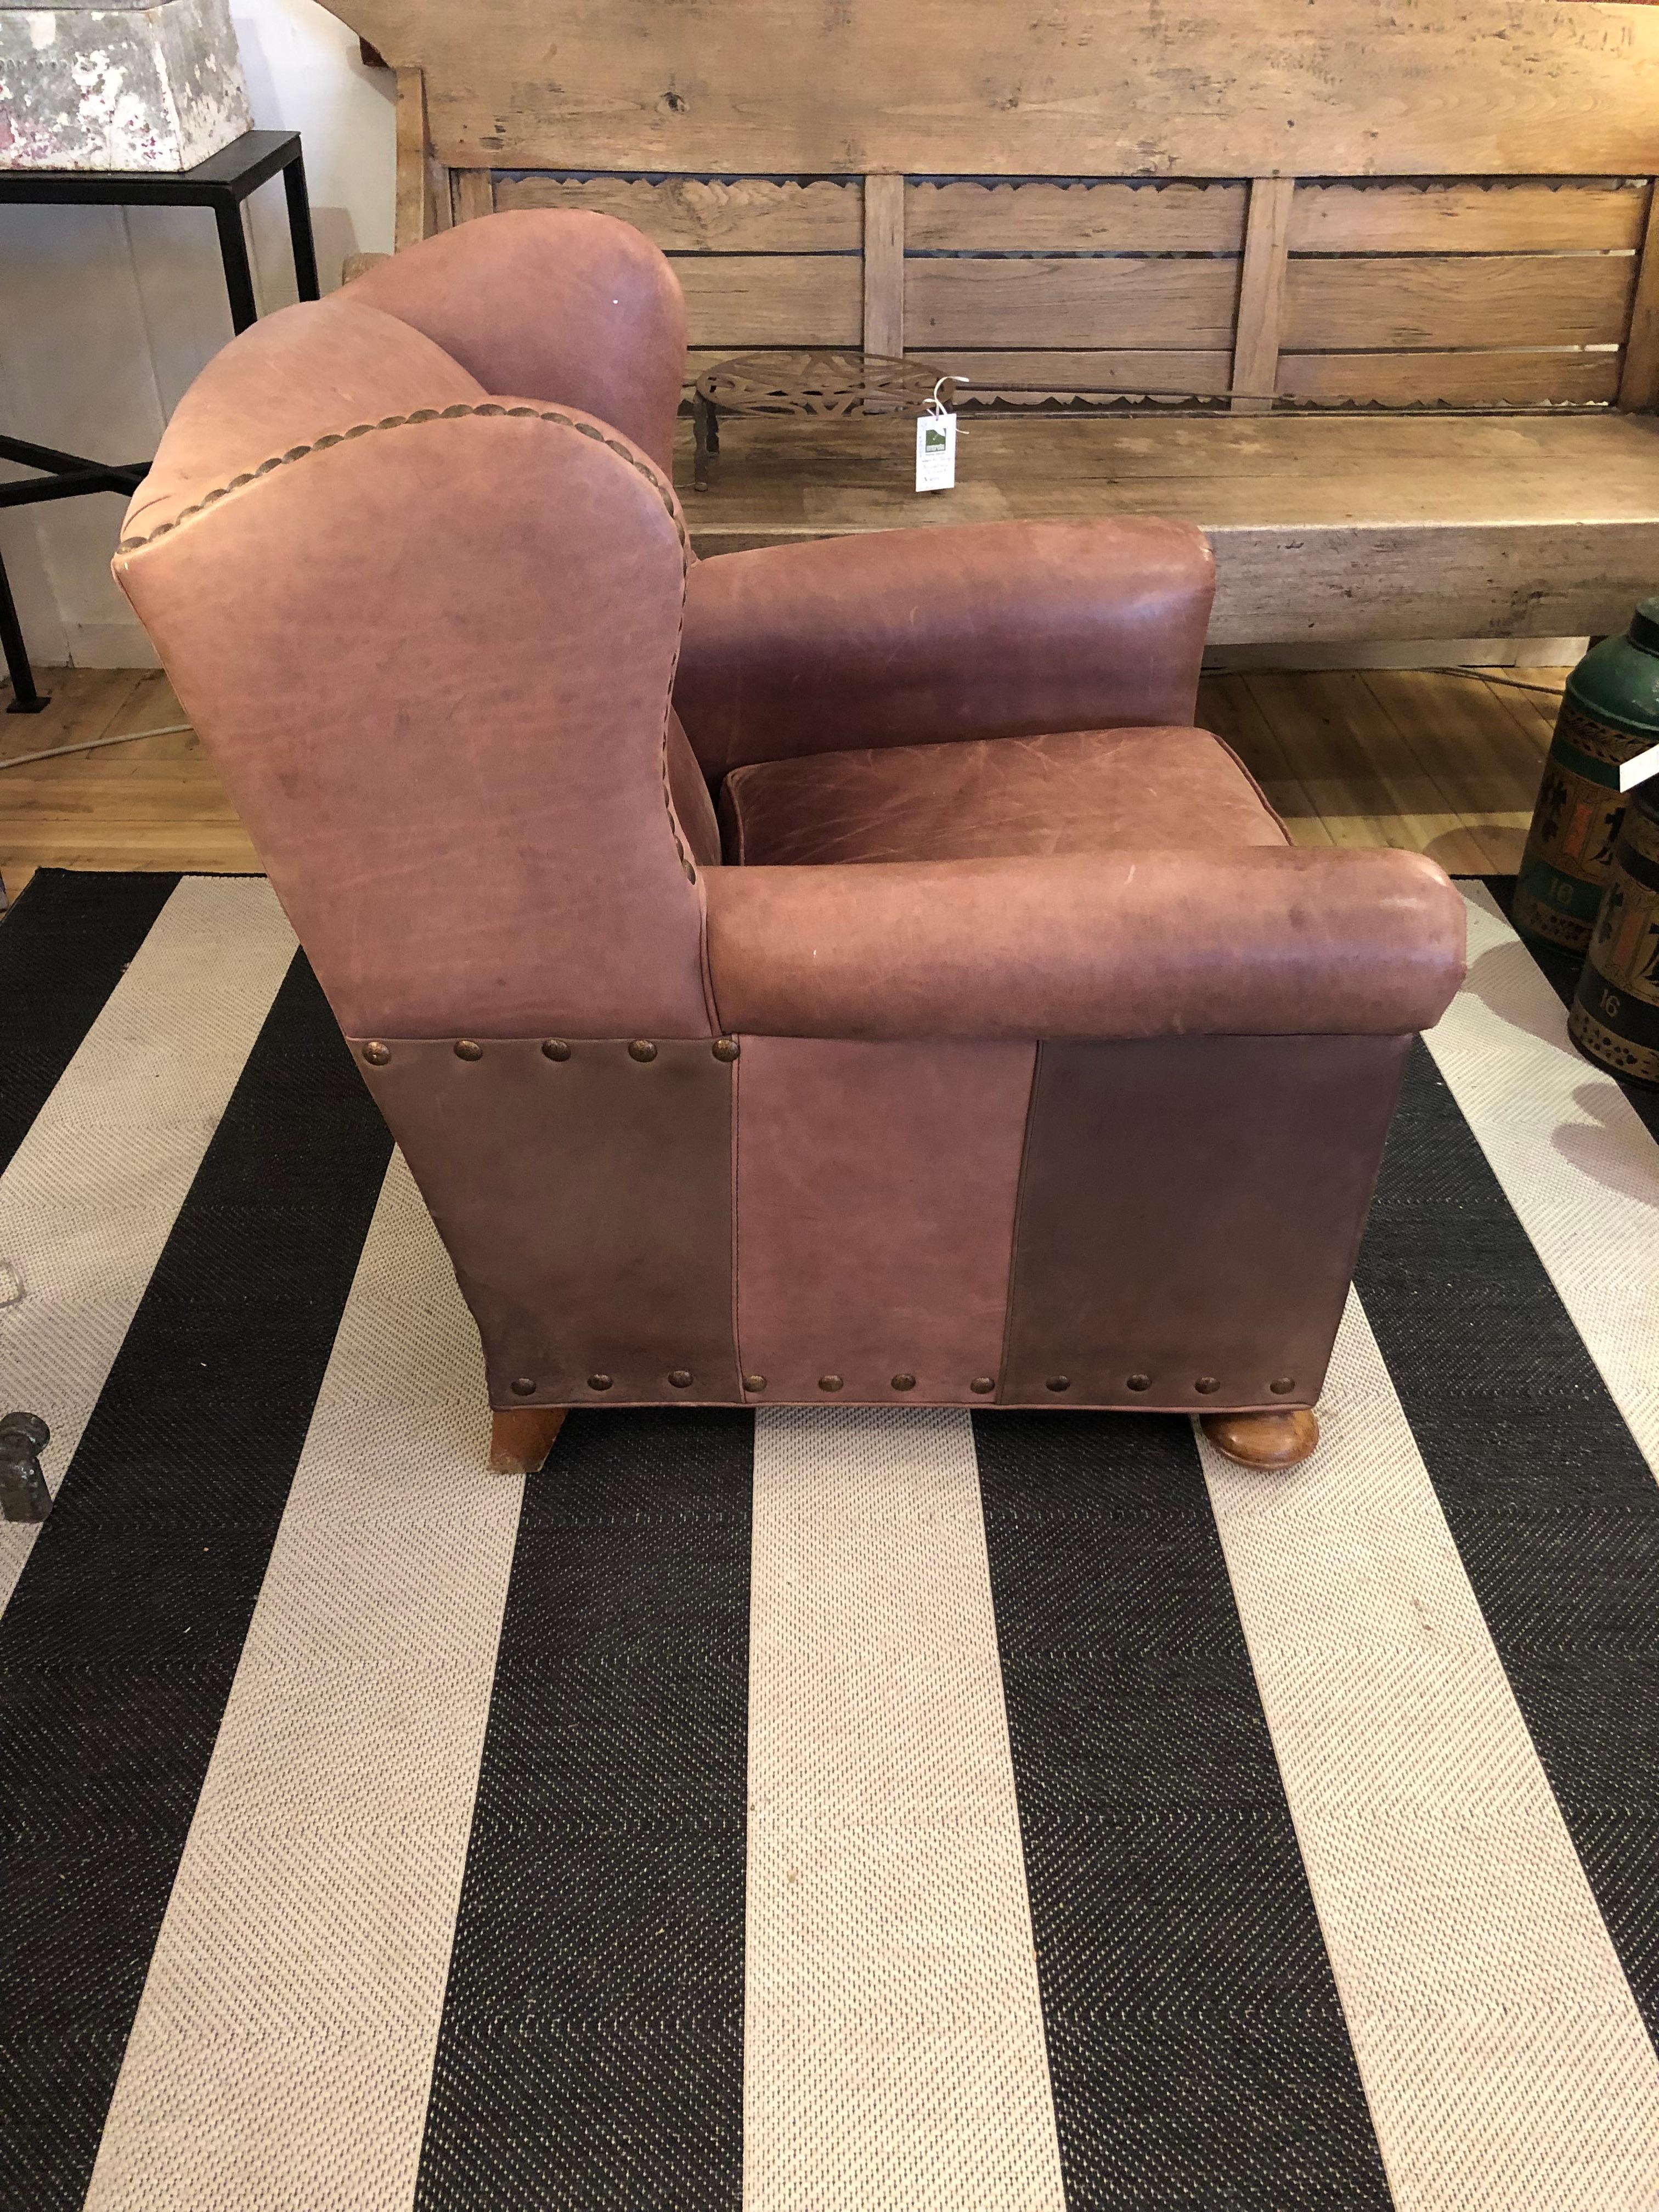 Classic medium sized soft brown leather club chair by Lee Industries having big brass nailhead detailing, bun feet and two tones of leather on the sides.  Removable seat cushion.
33.75 w at arm
29.25 w at top
arm height 22.5
seat depth 21